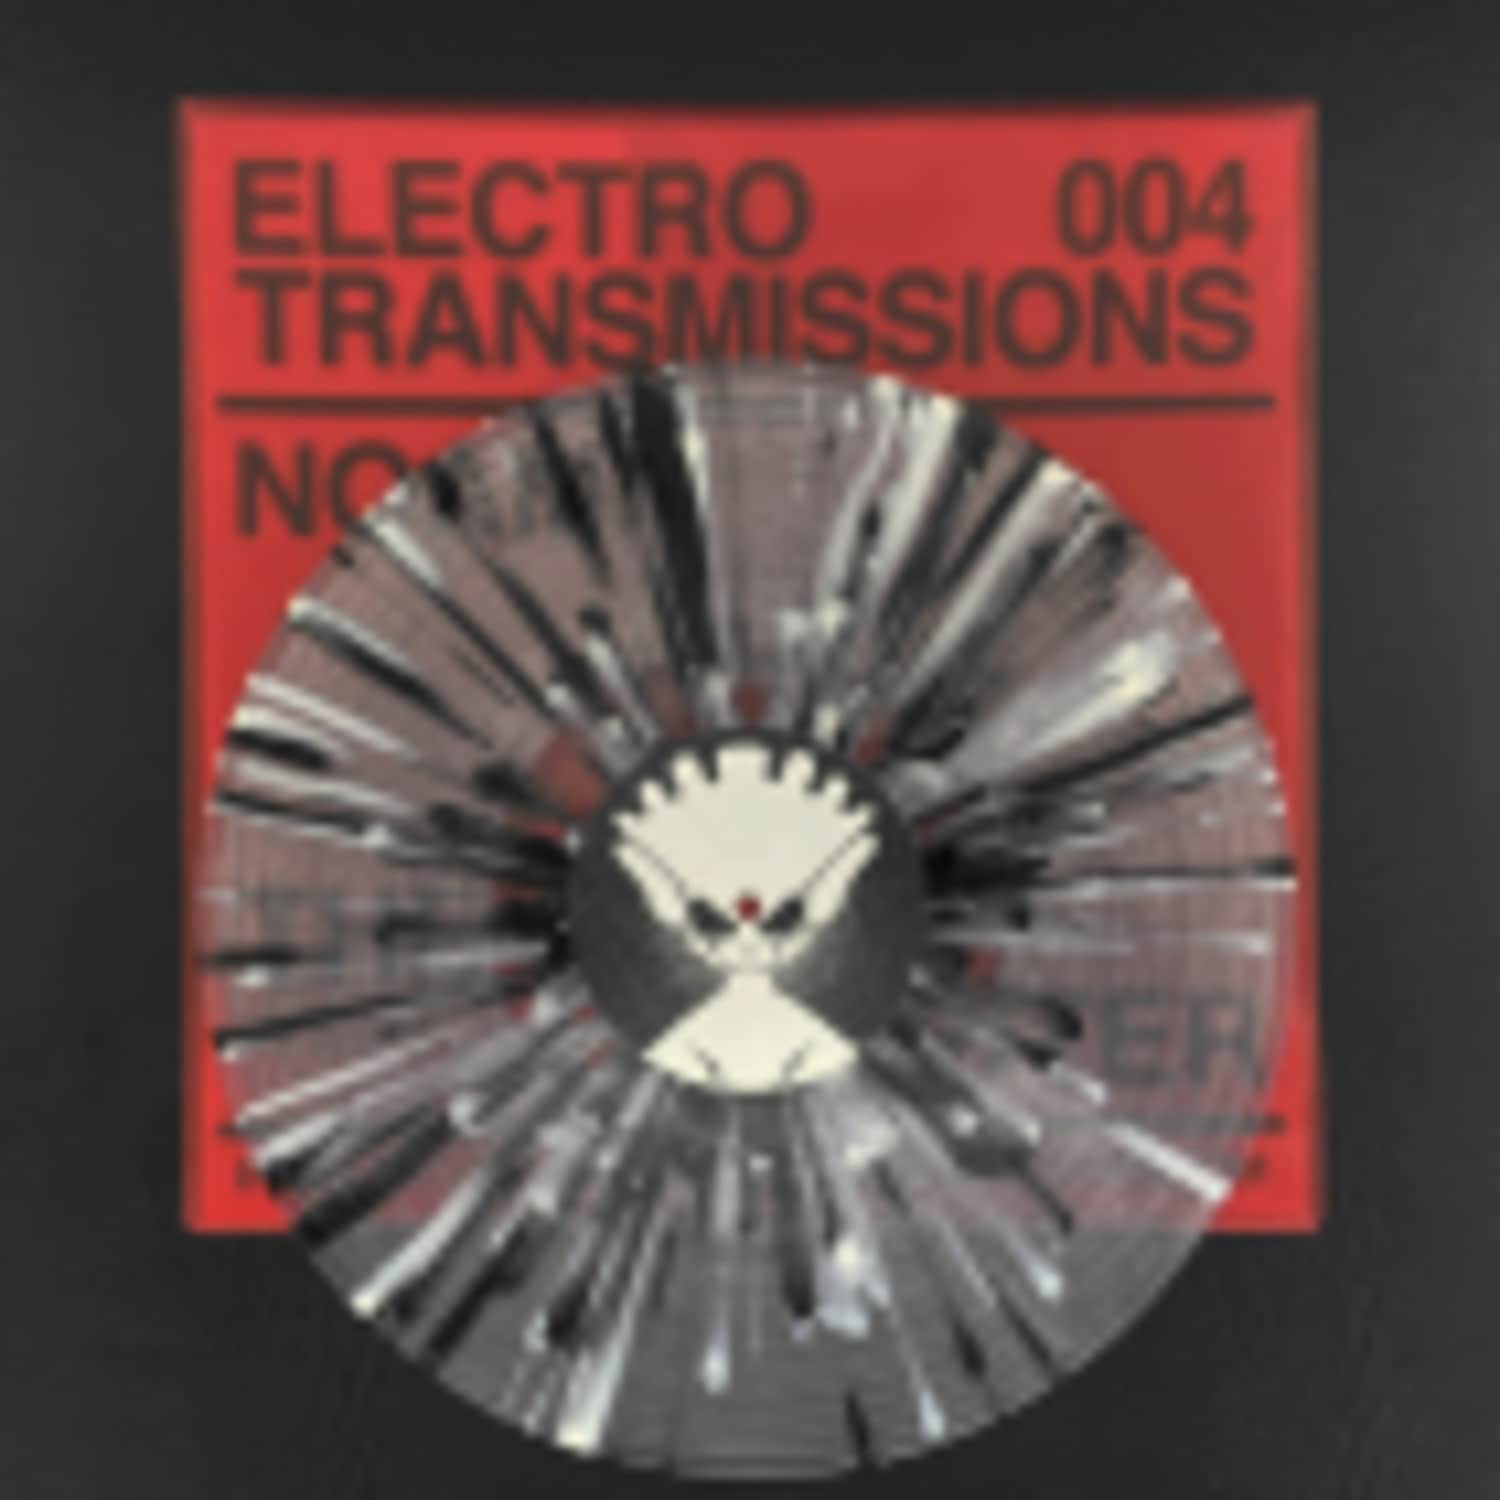 Noamm - ELECTRO TRANSMISSIONS 004 THE GHOST OF JUPITER EP 